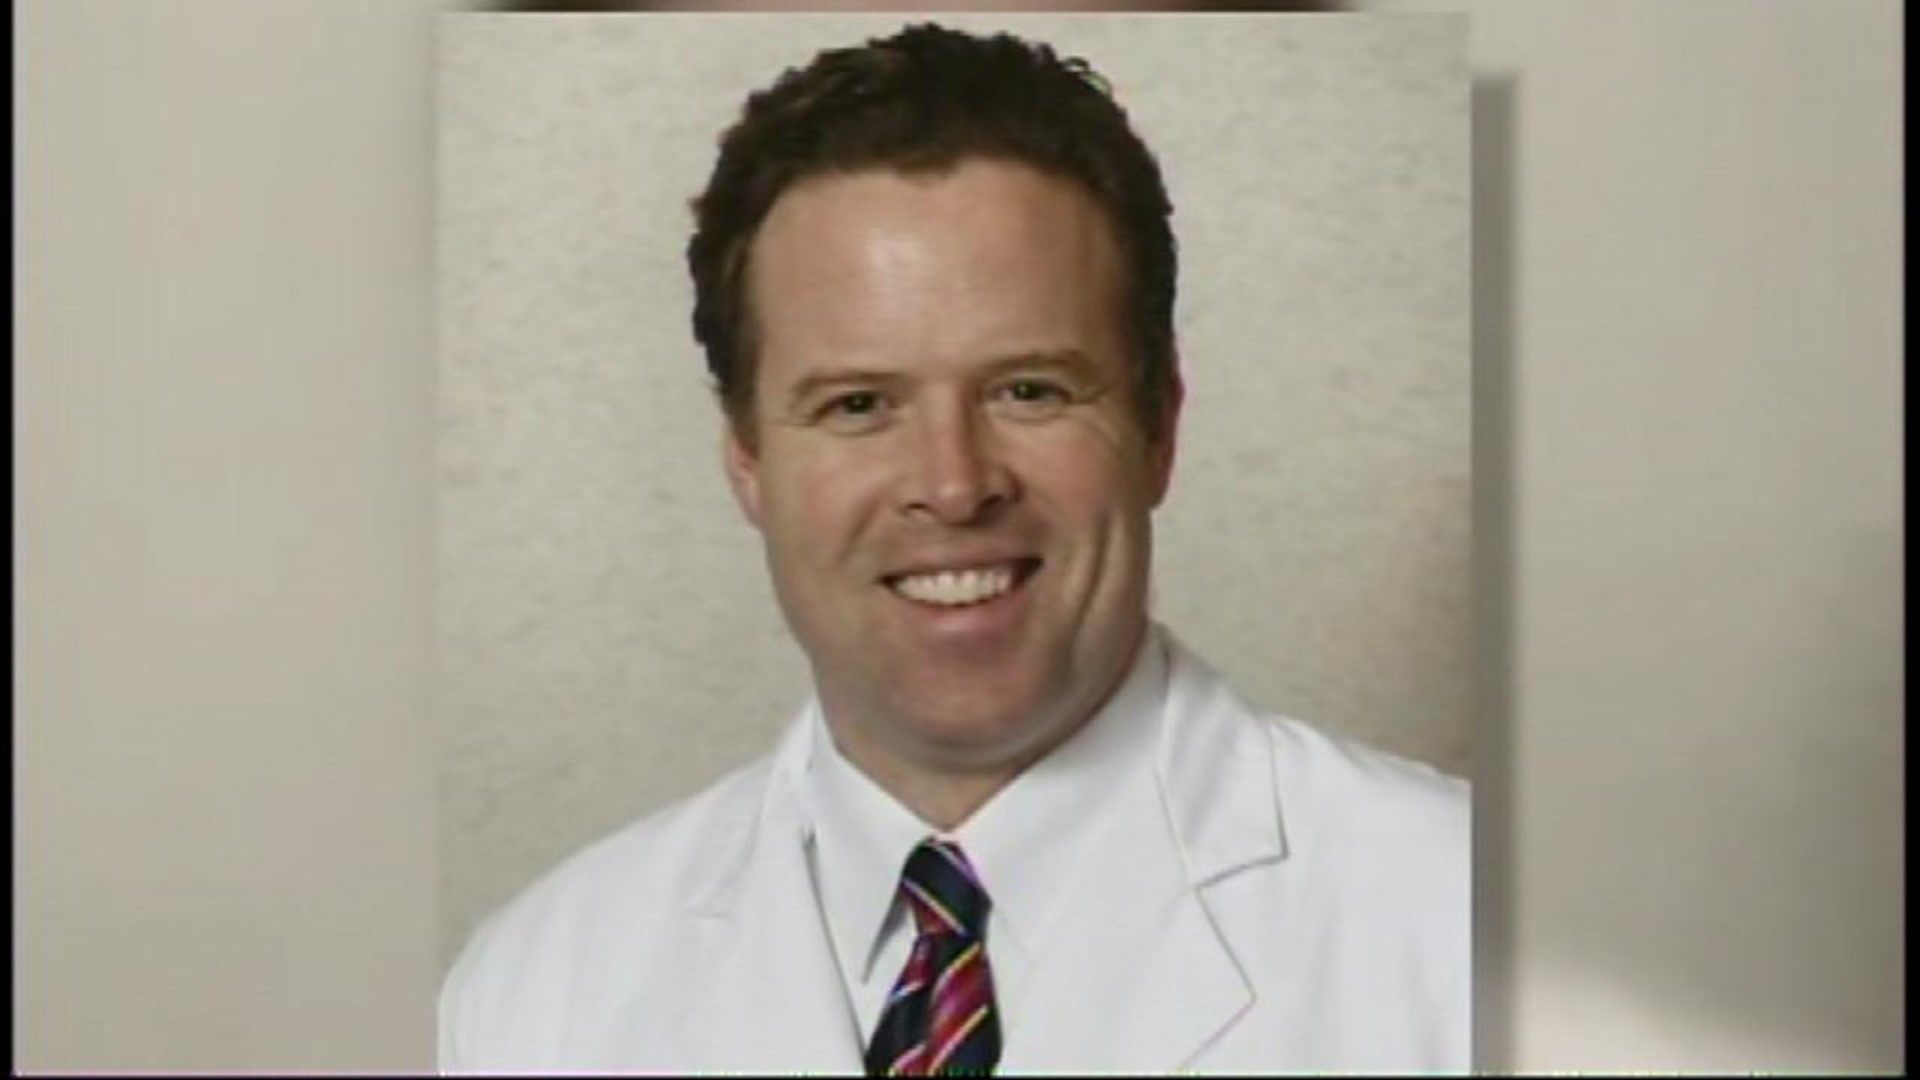 Federal Child Porn Charge Filed Against Pediatric Radiation Oncologist At Ohio State University Medical Center